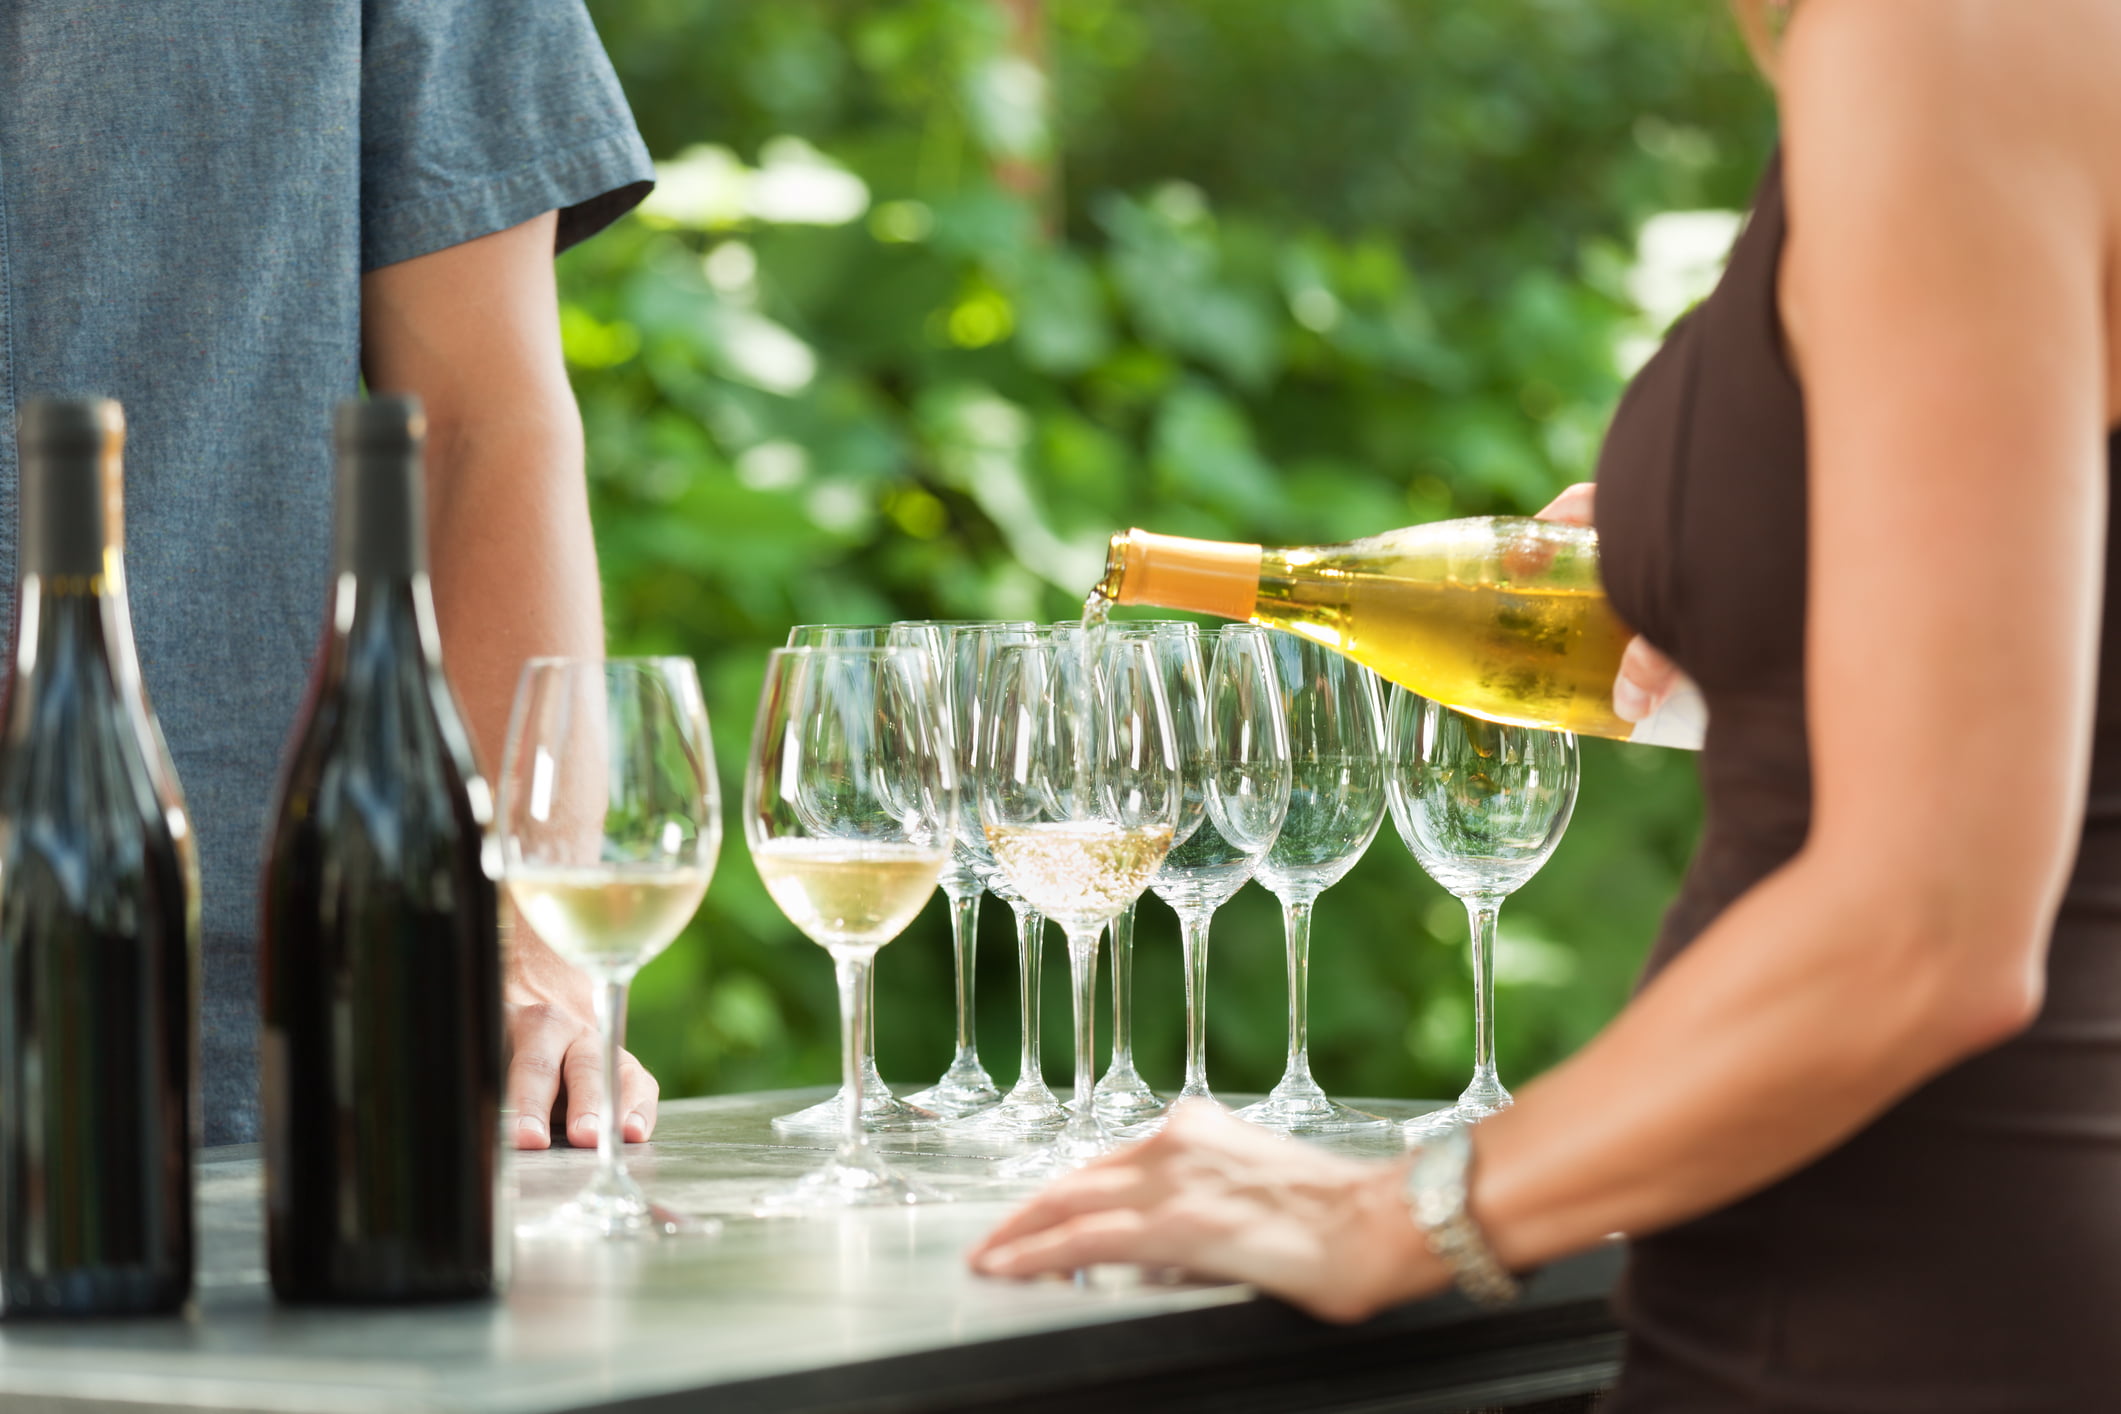 4 Great Reasons You’ll Love the Door County Wine Fest